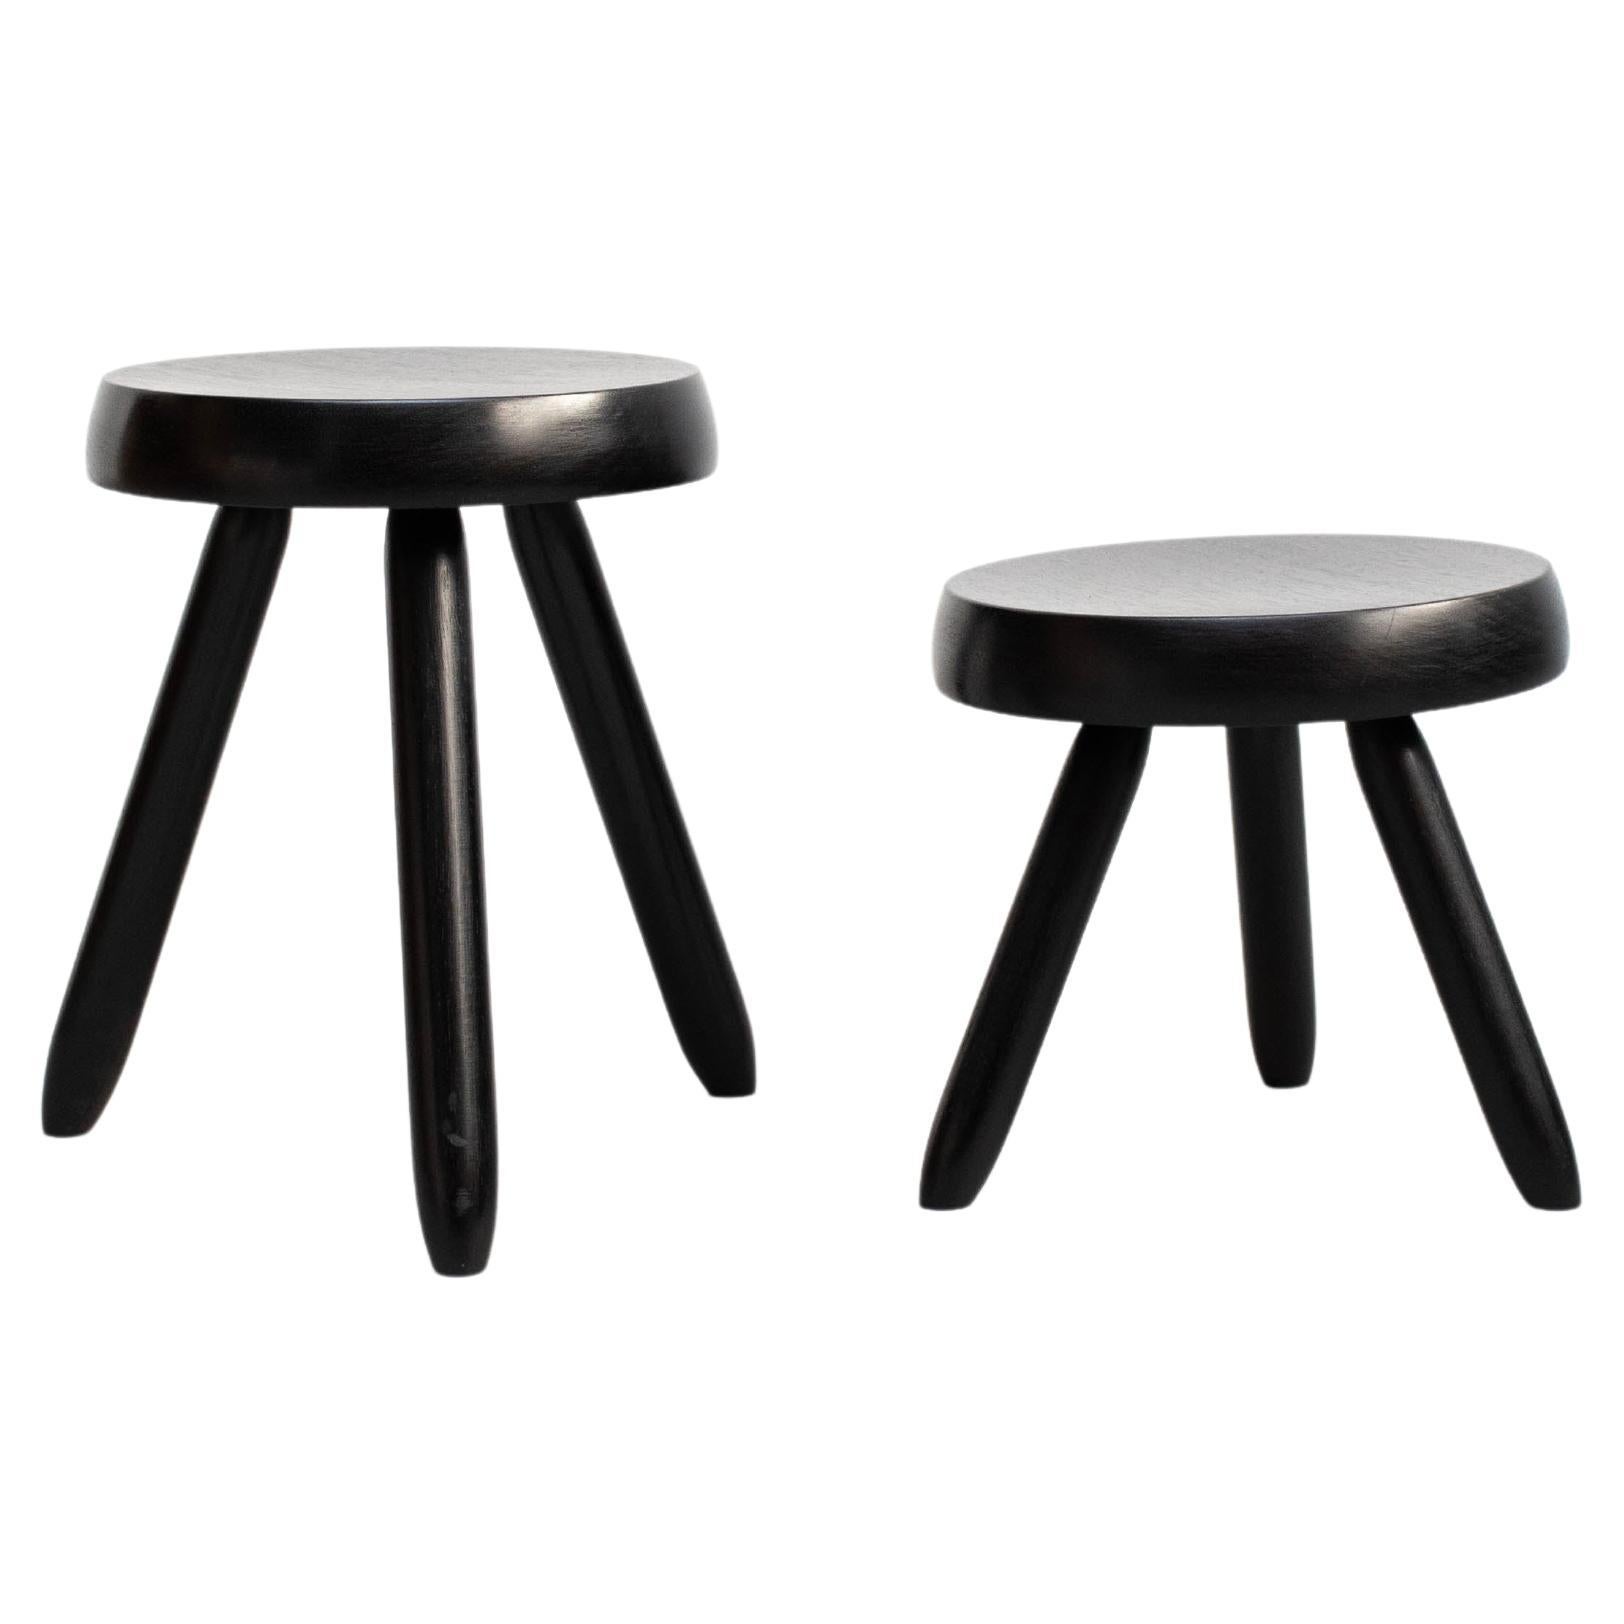 Set of Two Tripod Stool in the Style of Charlotte Perriand